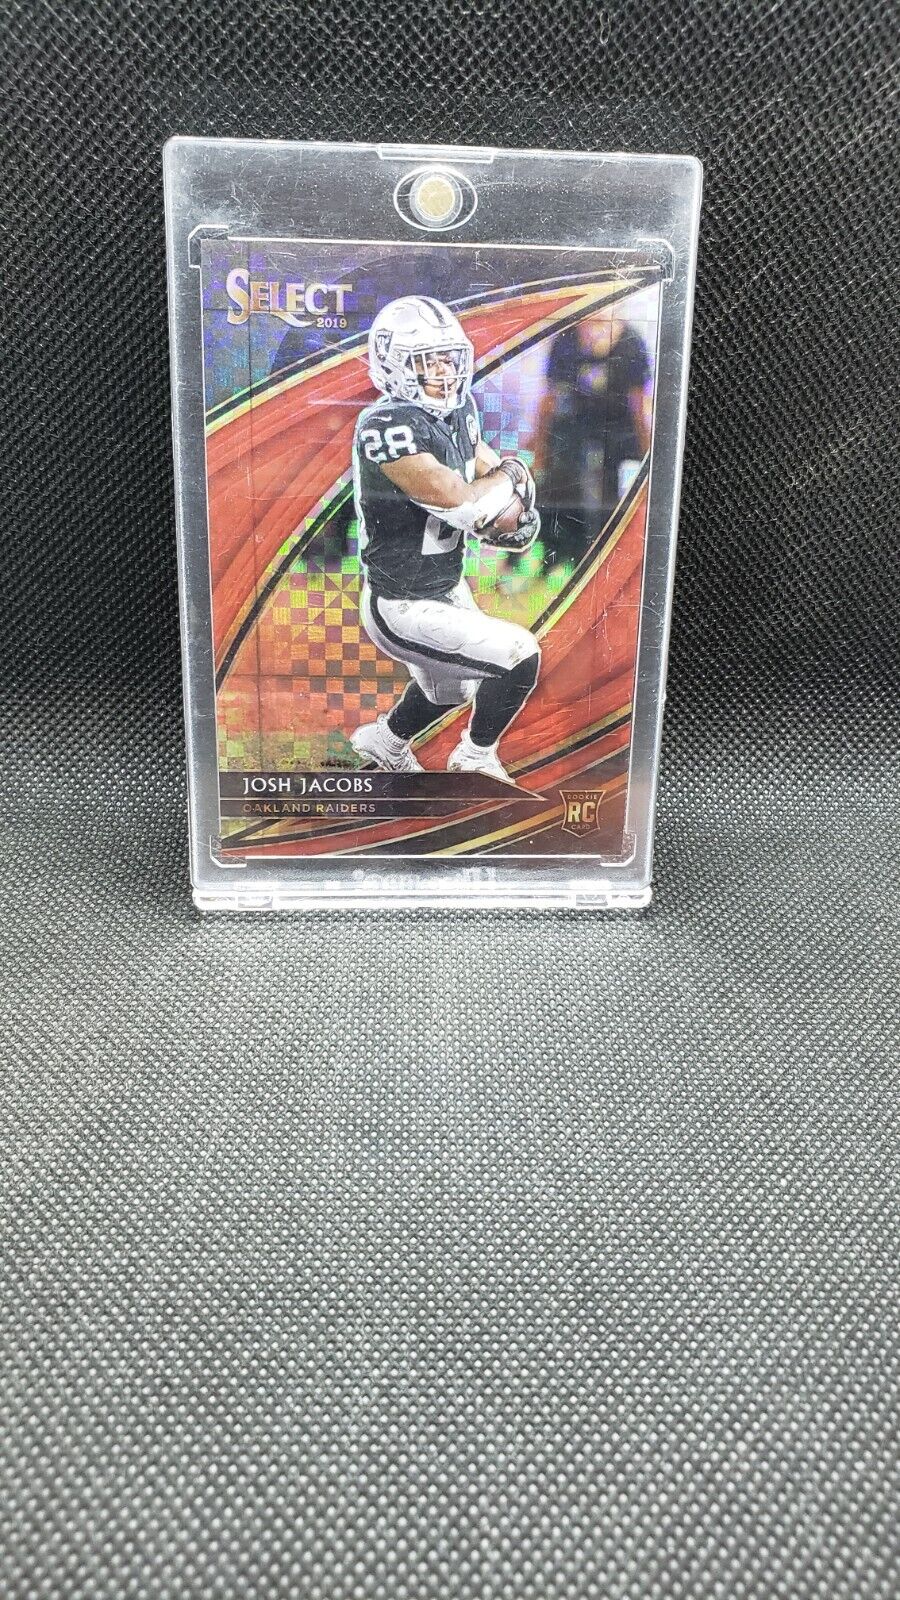 2019 Panini Select Josh Jacobs RC Red Prizm Field Level /49